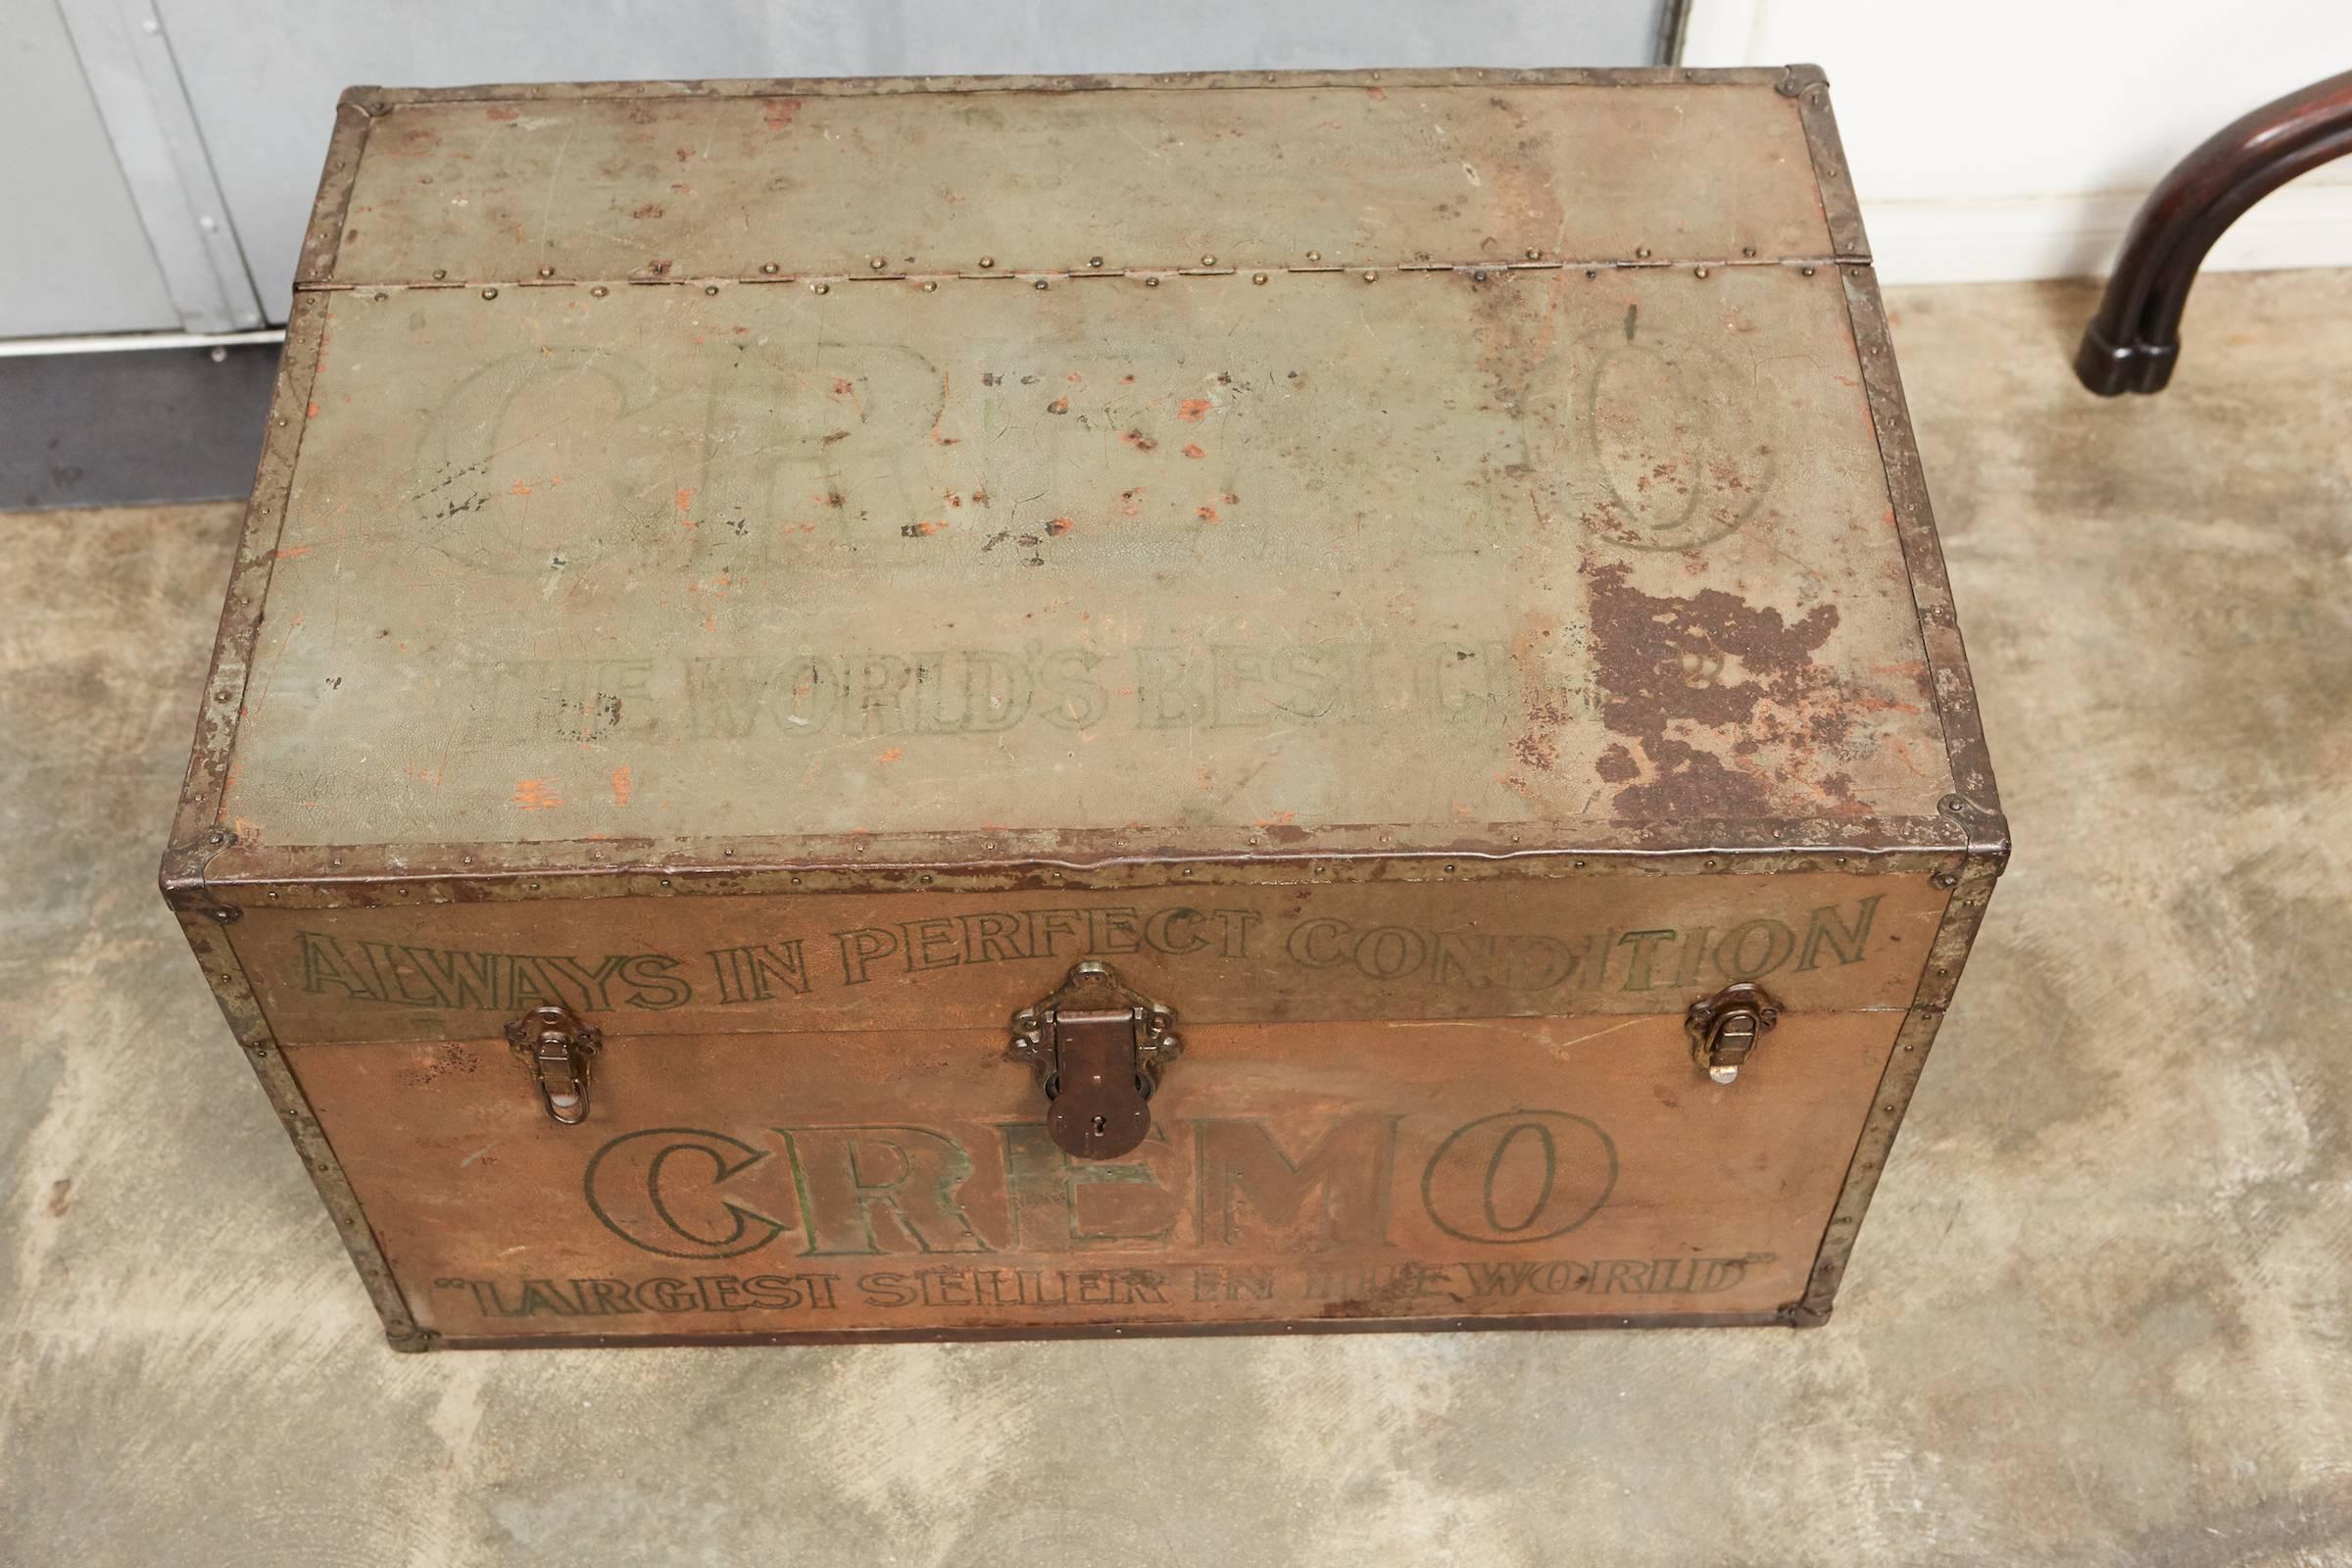 This metal Cremo cigar trunk has a beautiful patina with worn orange, green and black coloring and lettering. The trunk was used to store and ship cigar boxes as indicated by the vented portal on the side. The trunk has several slogans and logos